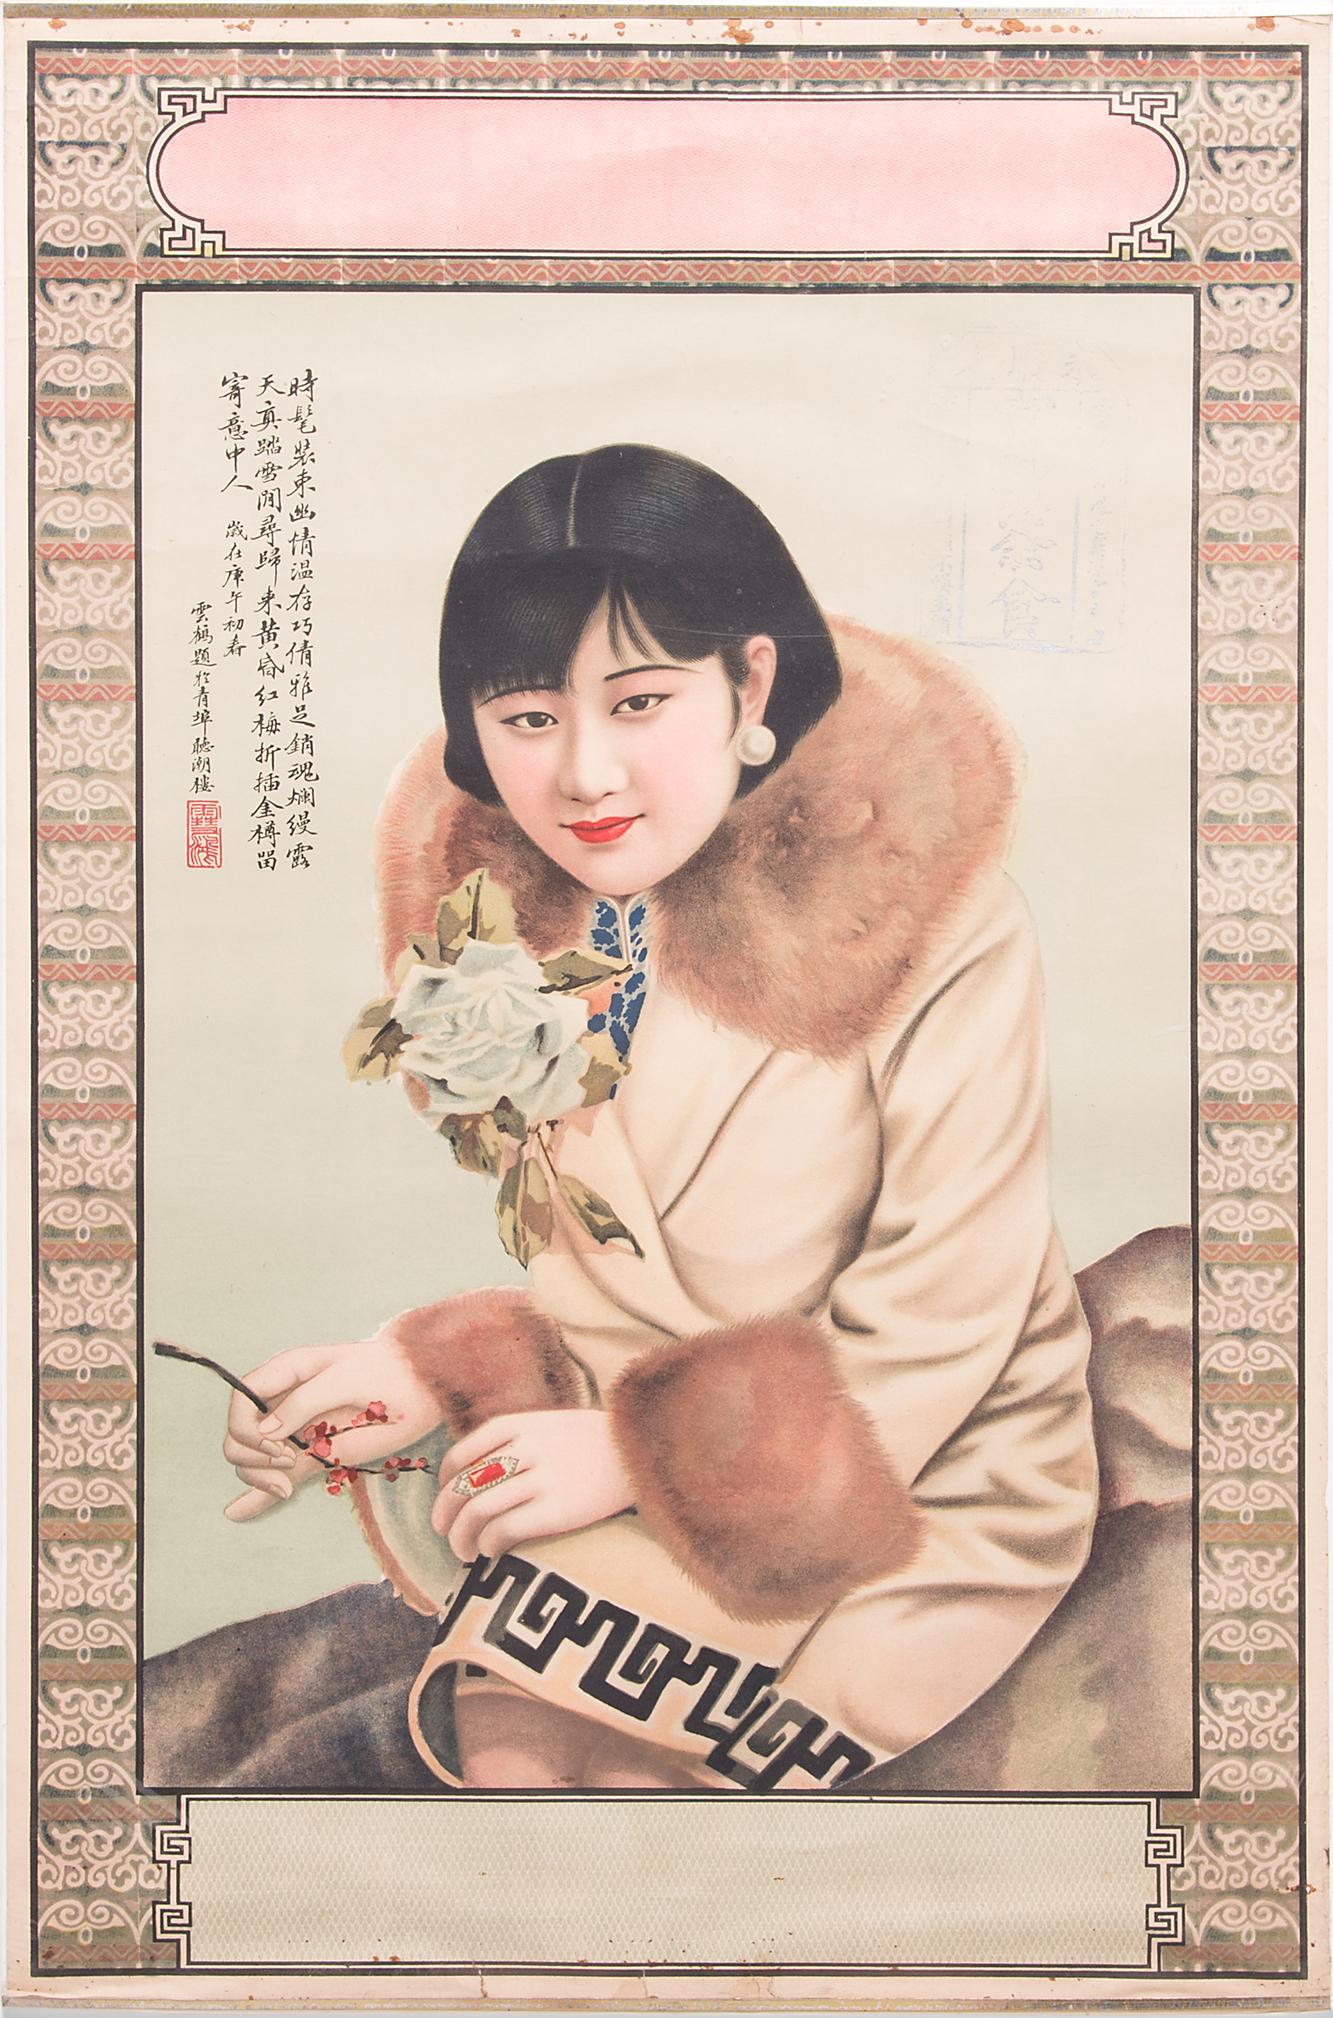 Unknown Figurative Print - Vintage Chinese Lithograph Advertisement Poster